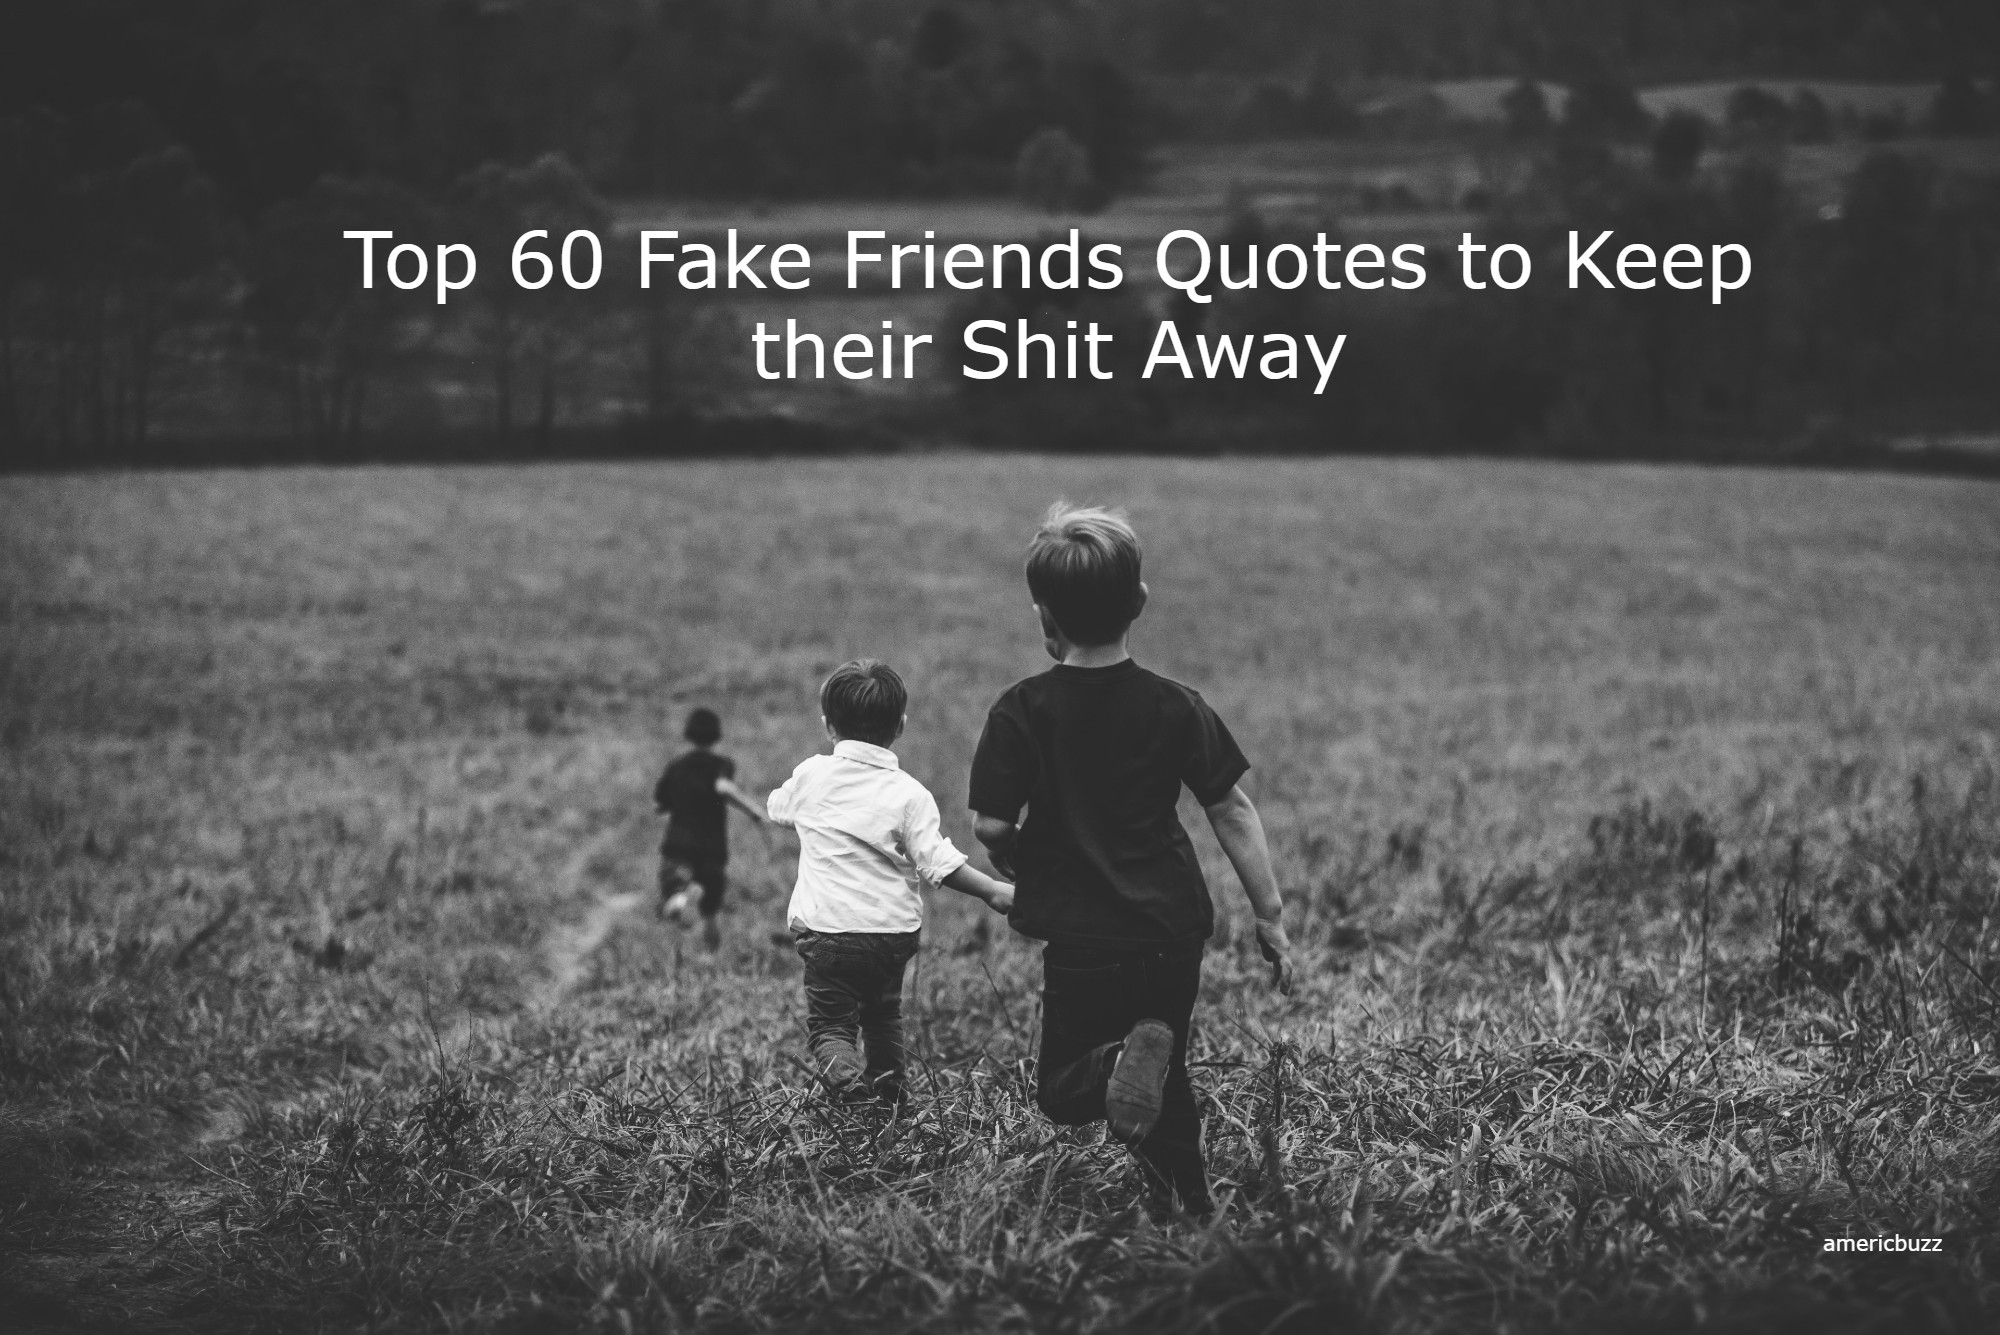 Top 60 Fake Friends Quotes to Keep their Shit Away